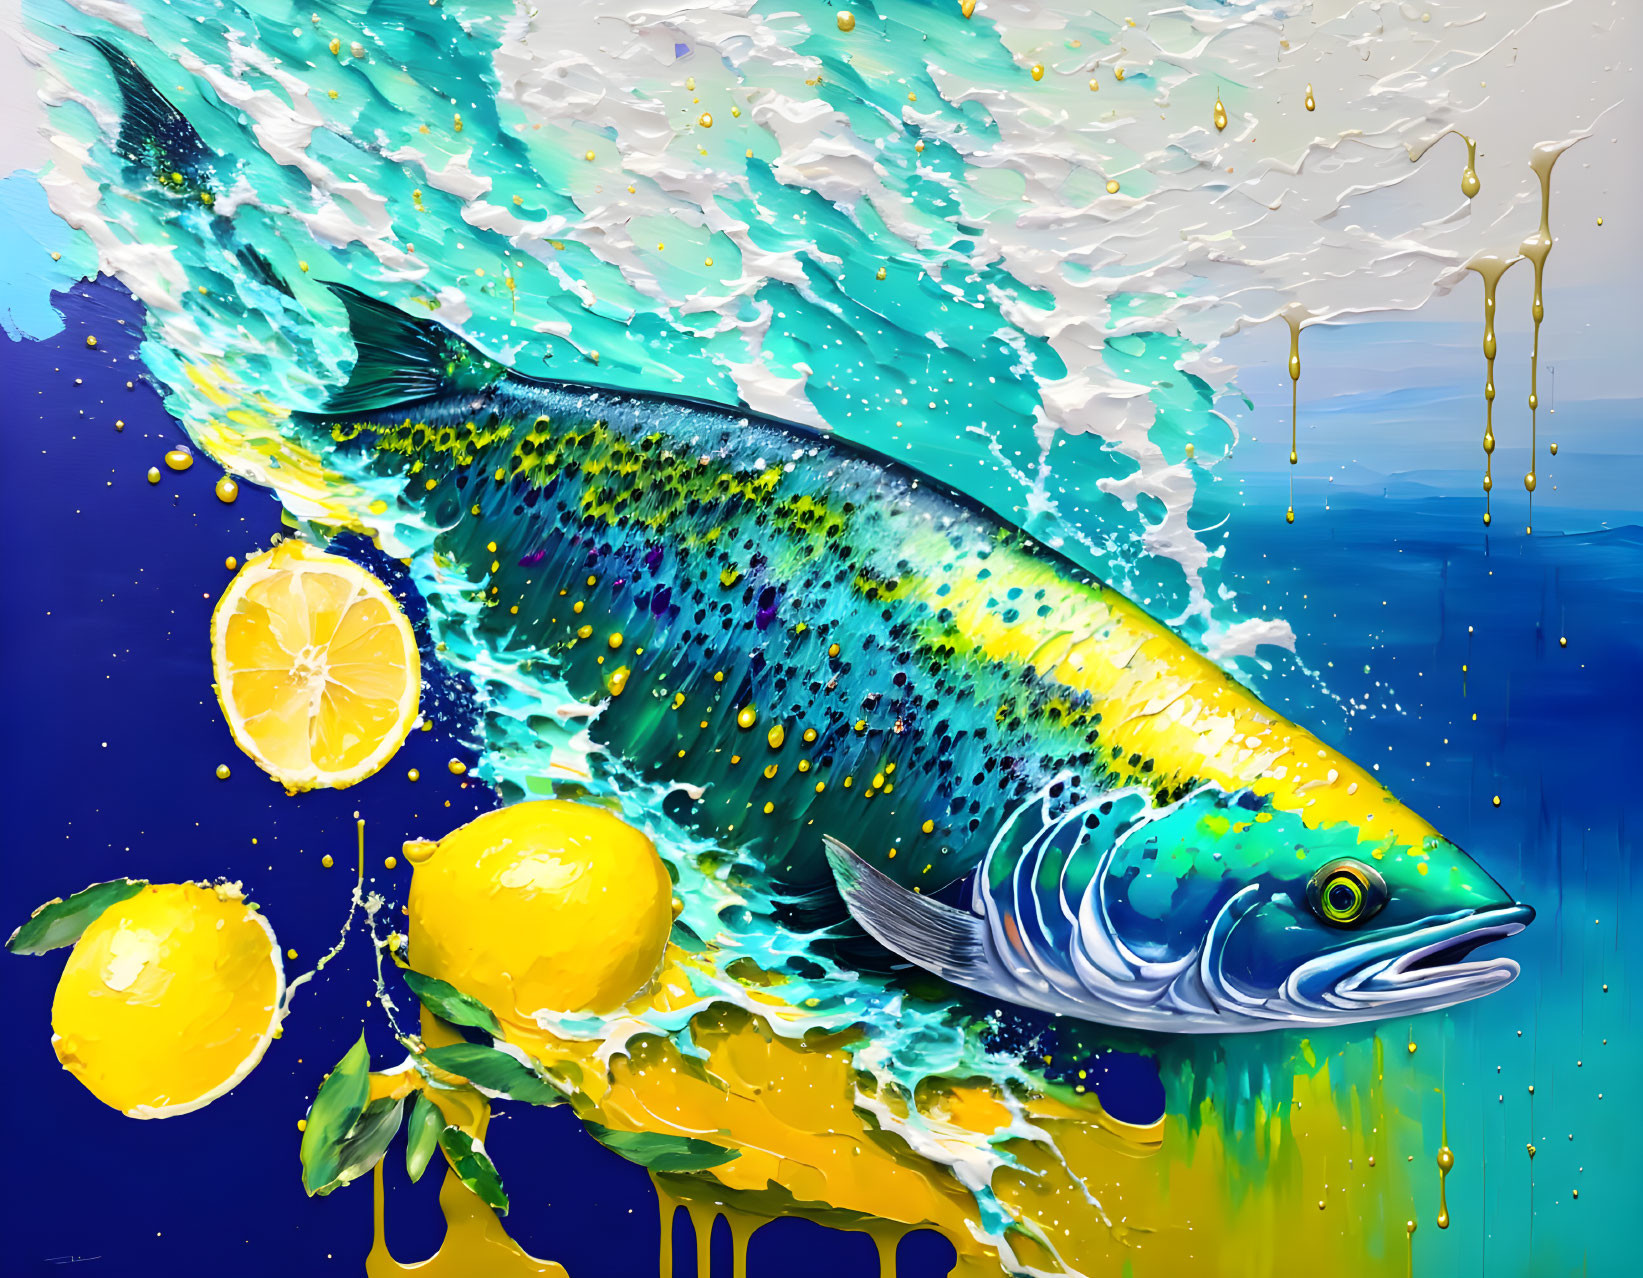 Colorful Fish Leaping from Ocean with Splashing Waves